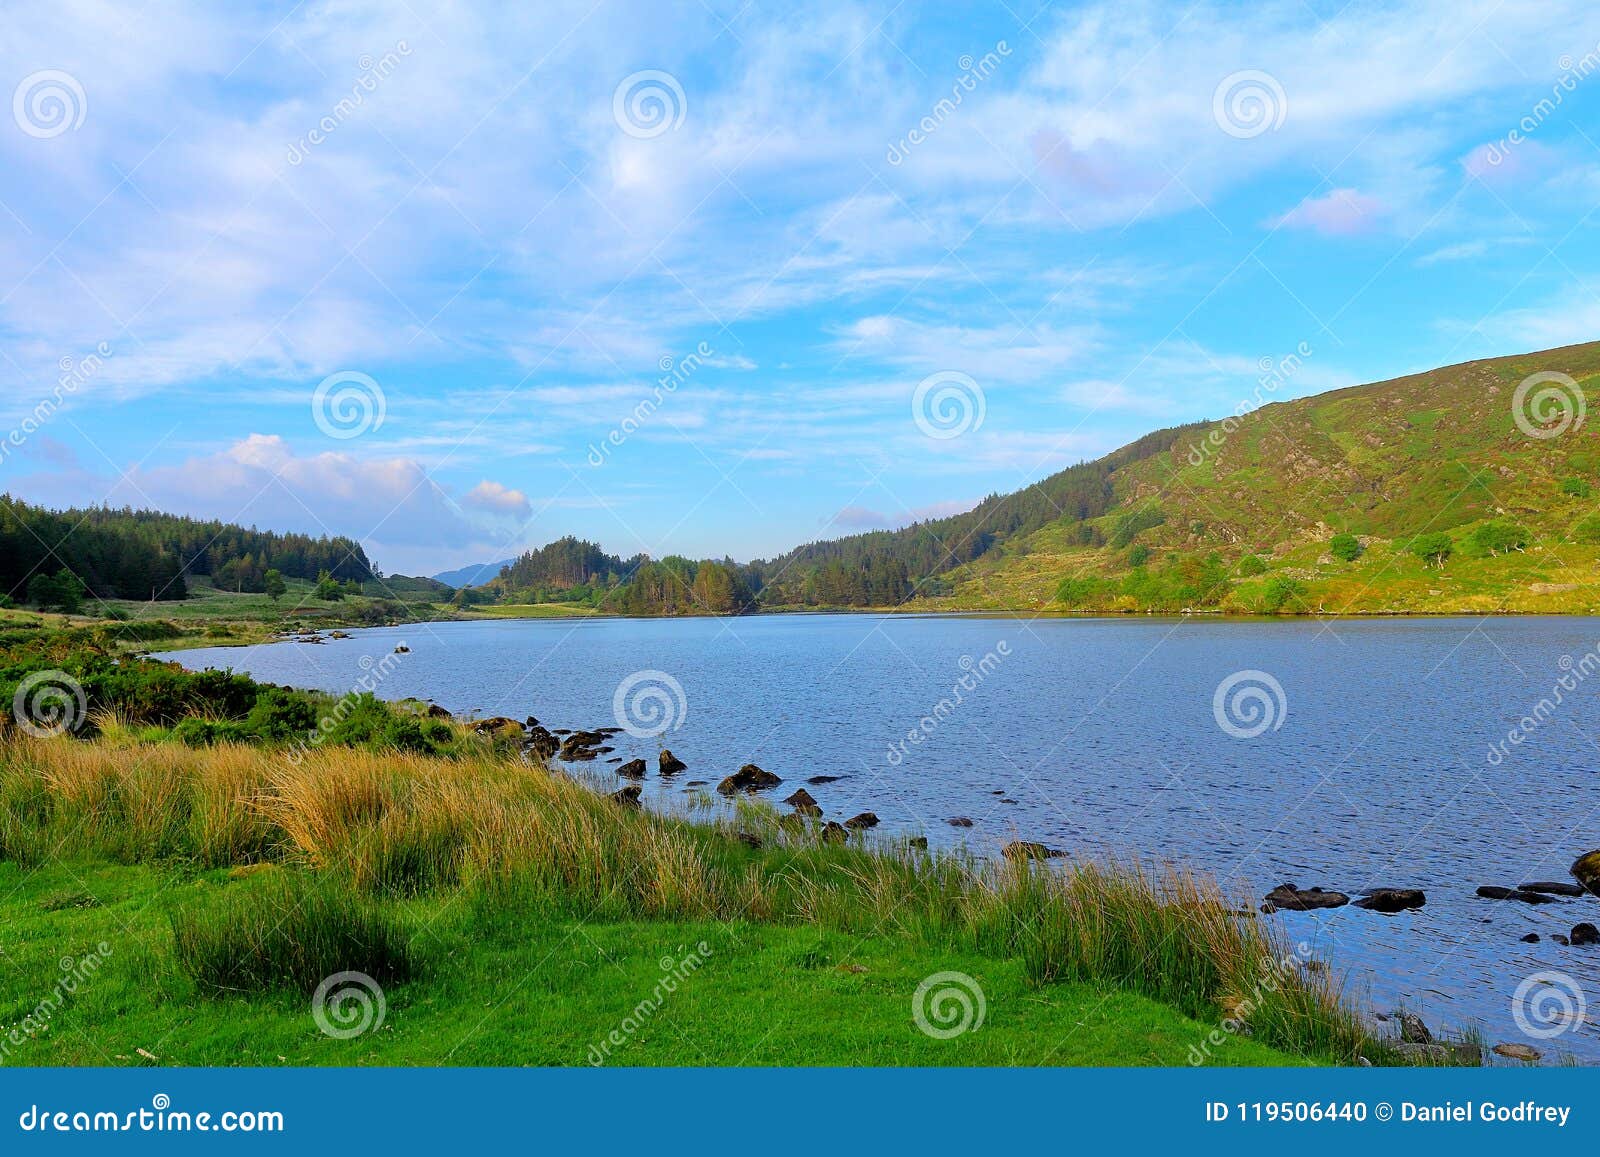 Countryside Lake View in Scenic Ireland Stock Photo - Image of local ...